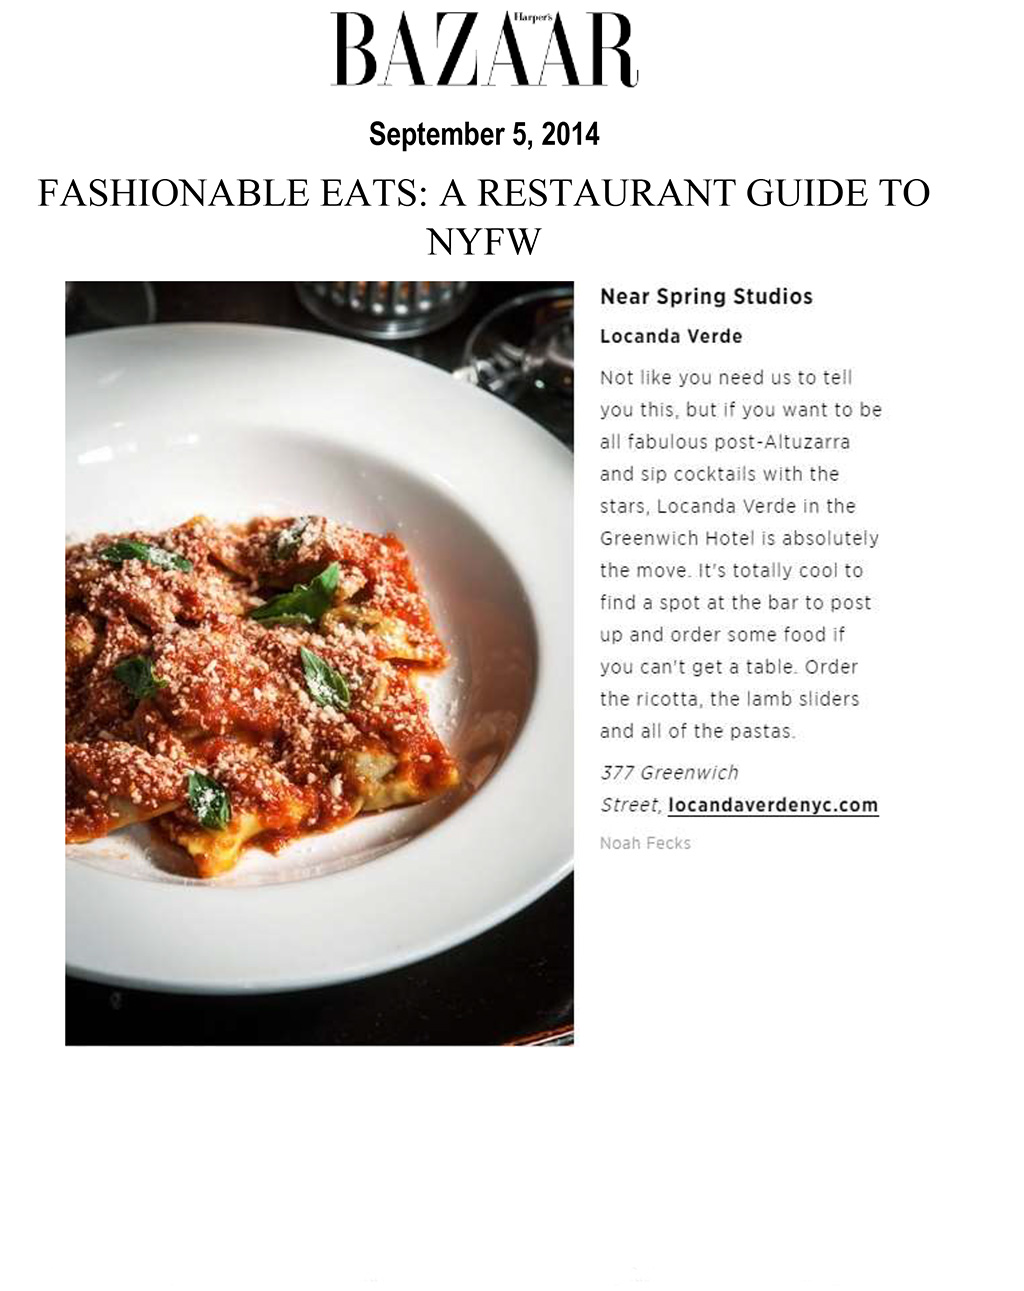 Harper's Bazaar recommends hotel guests in New York for Fashion Week dine at Tribeca favorite Locanda Verde